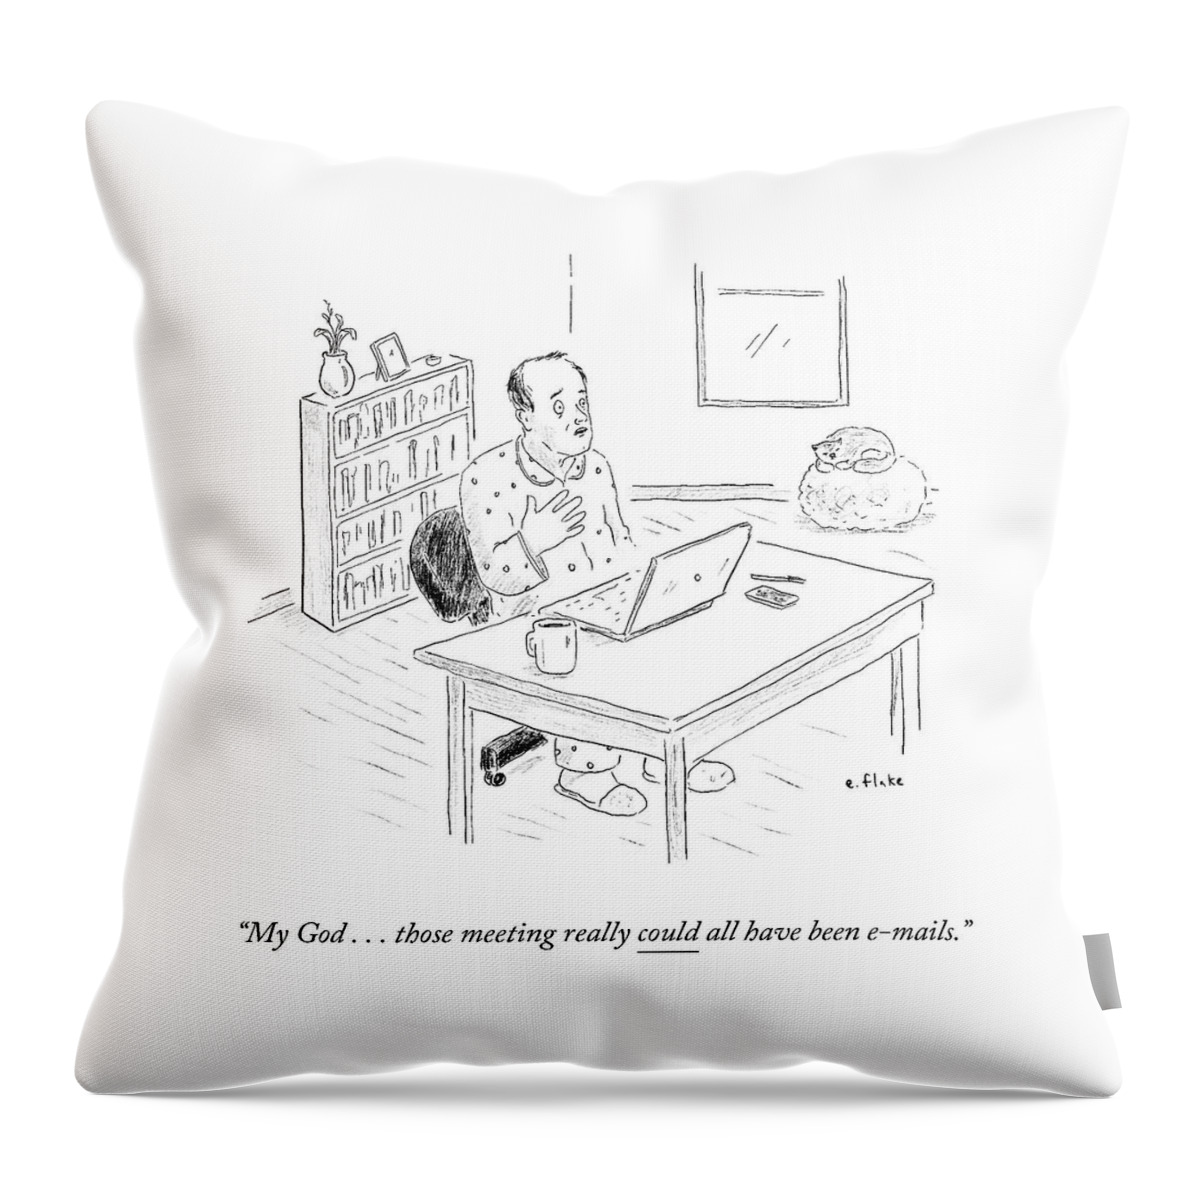 Meetings Could Have Been E-mails Throw Pillow